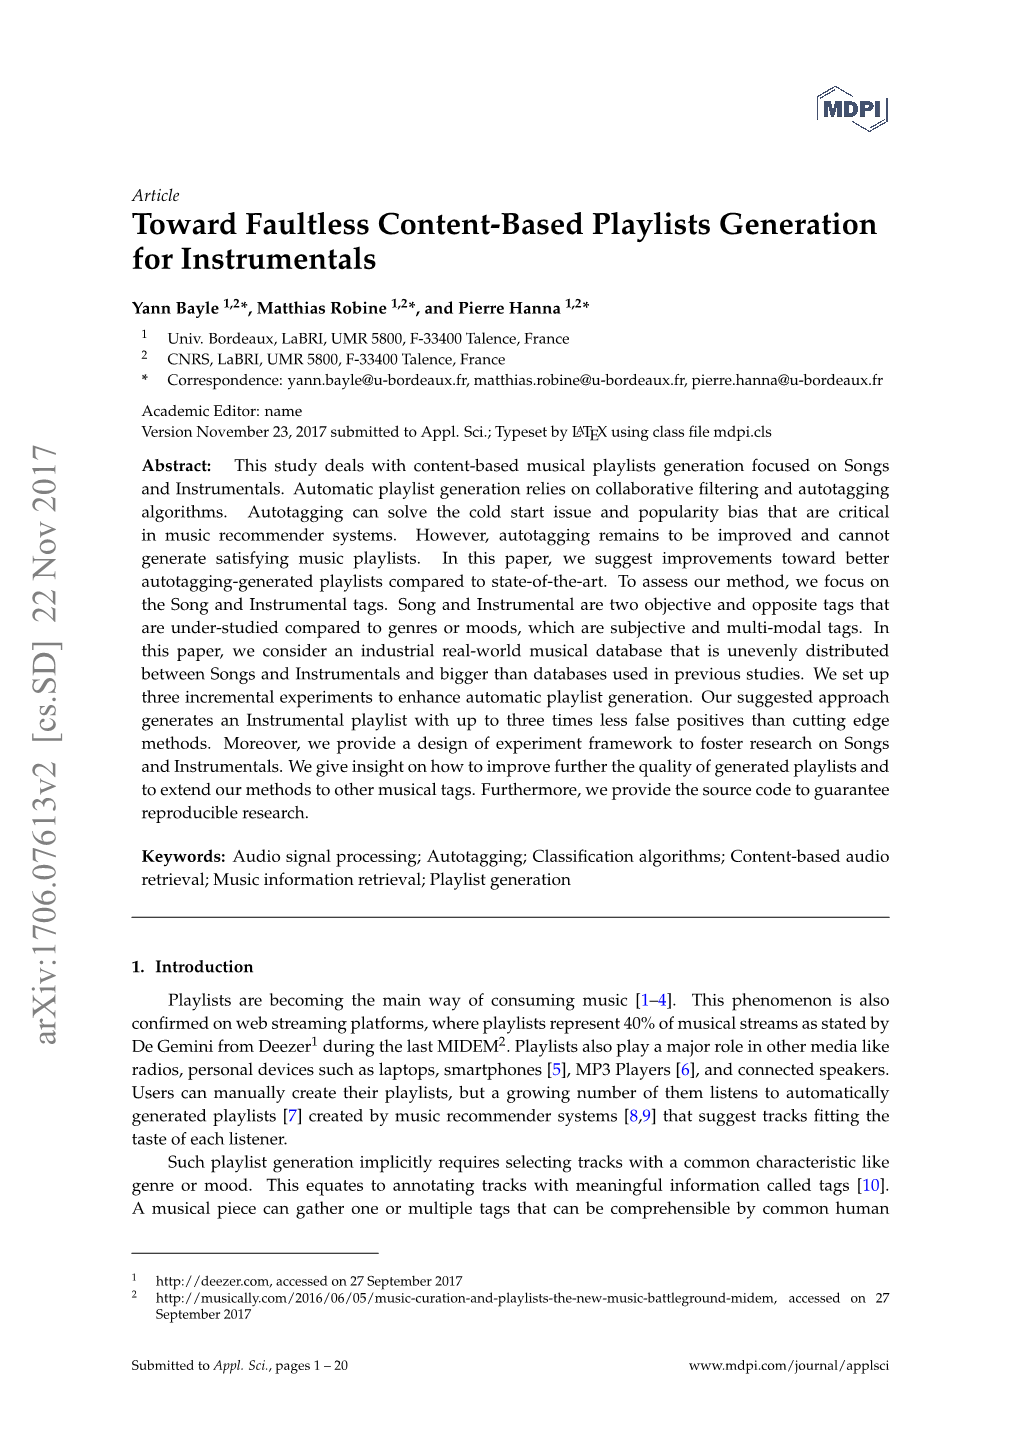 Toward Faultless Content-Based Playlists Generation for Instrumentals